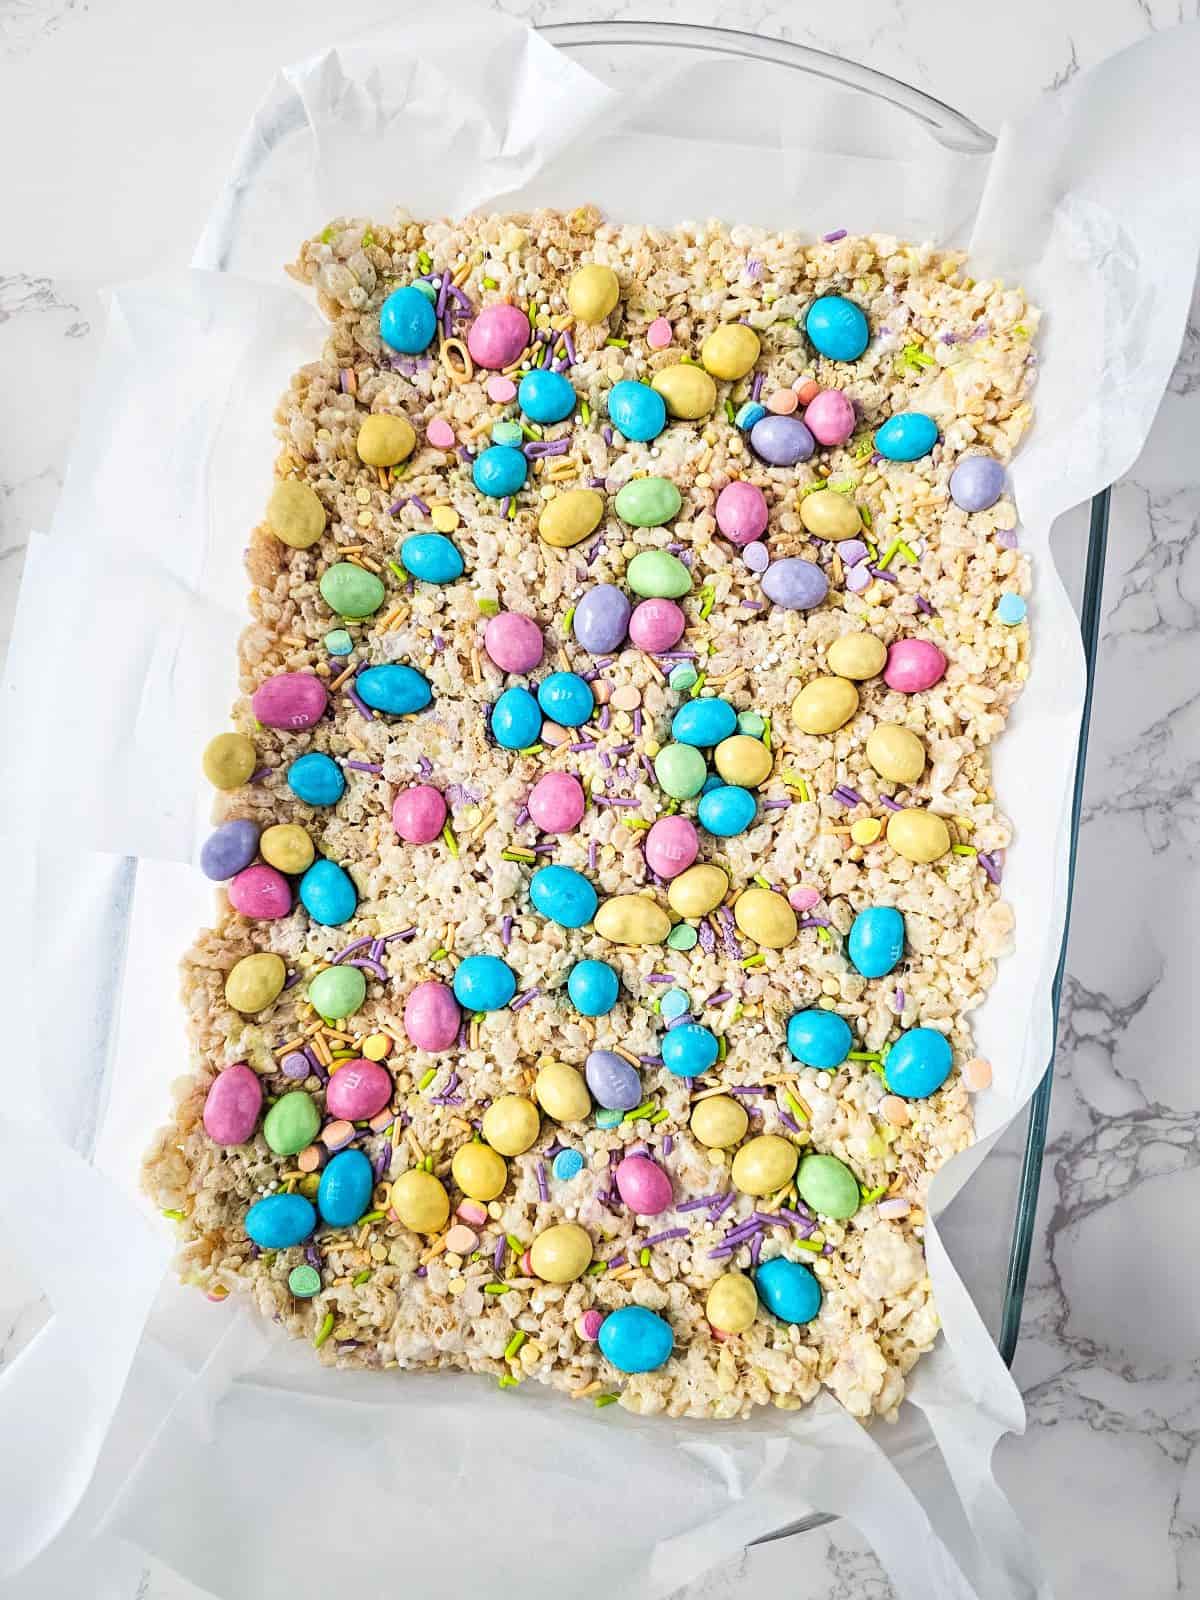 A tray of rice cereal treat with colorful M&M candy toppings on a marble surface.